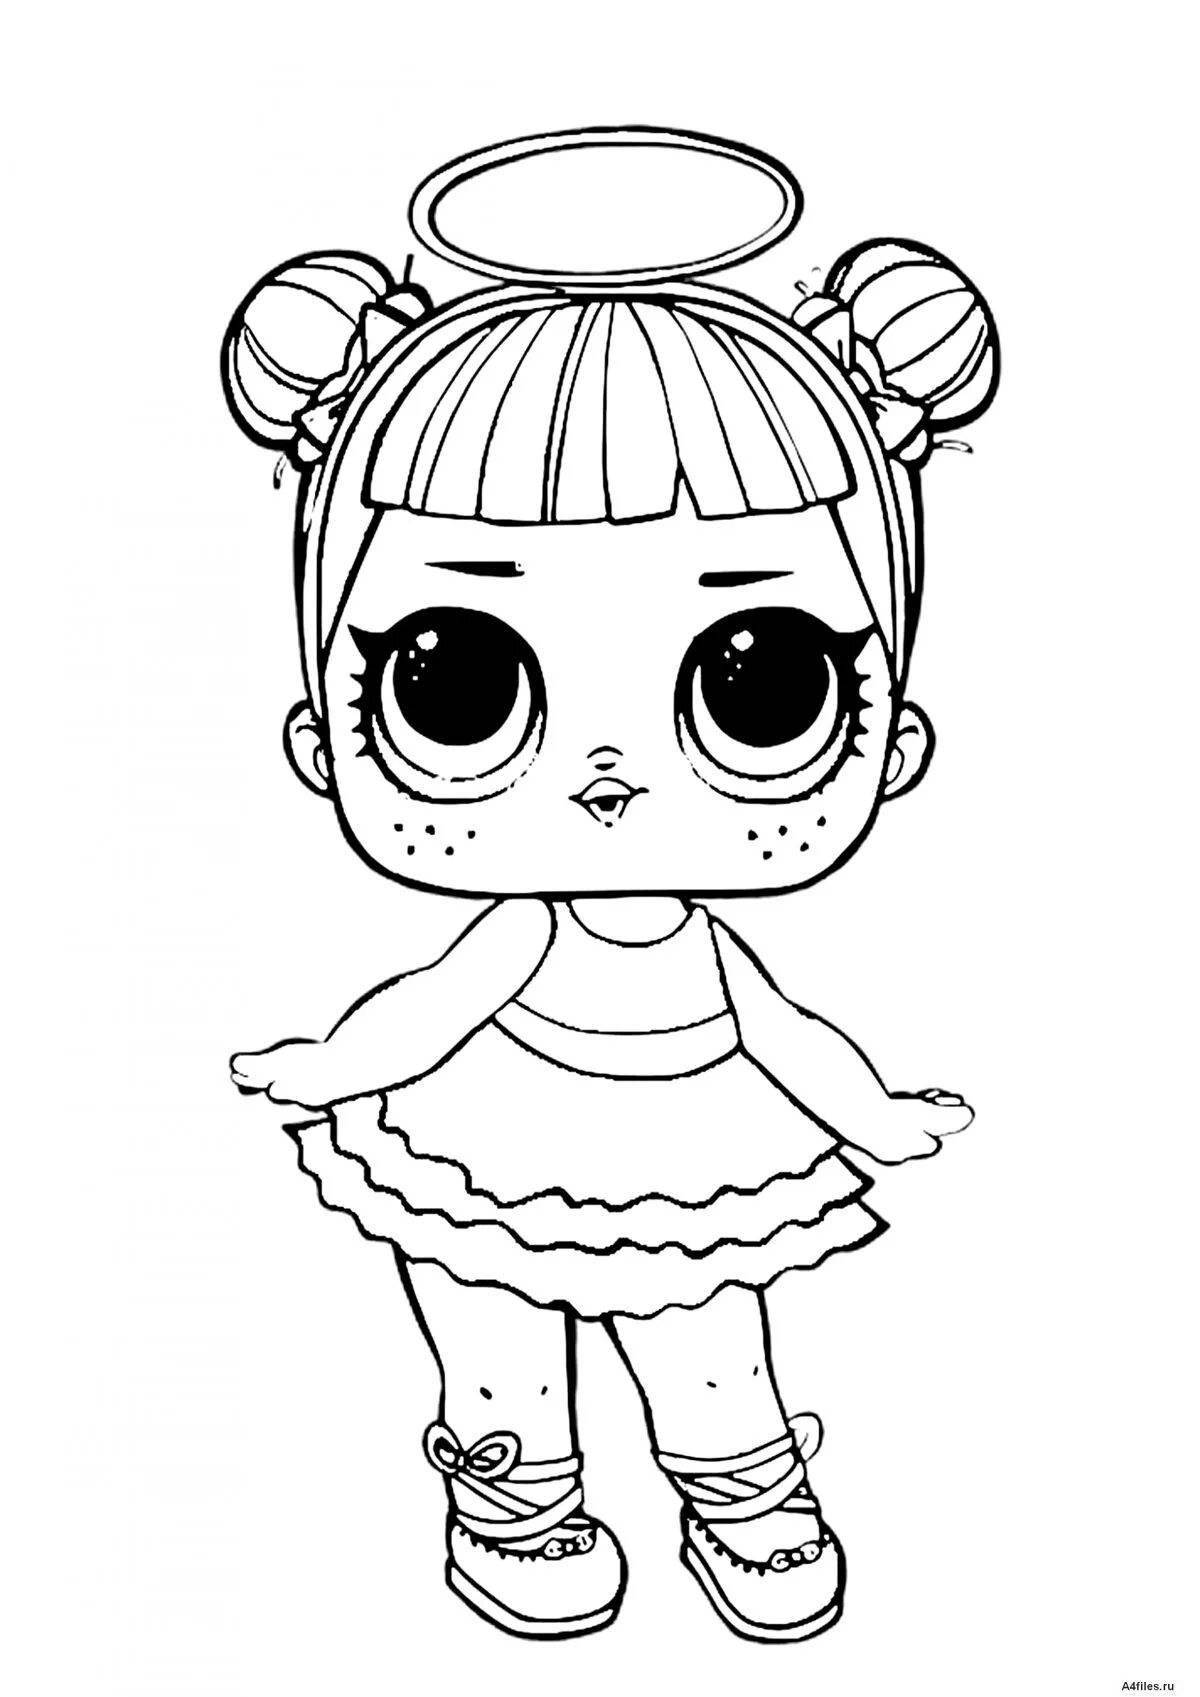 Fun coloring pages lol kids dolls